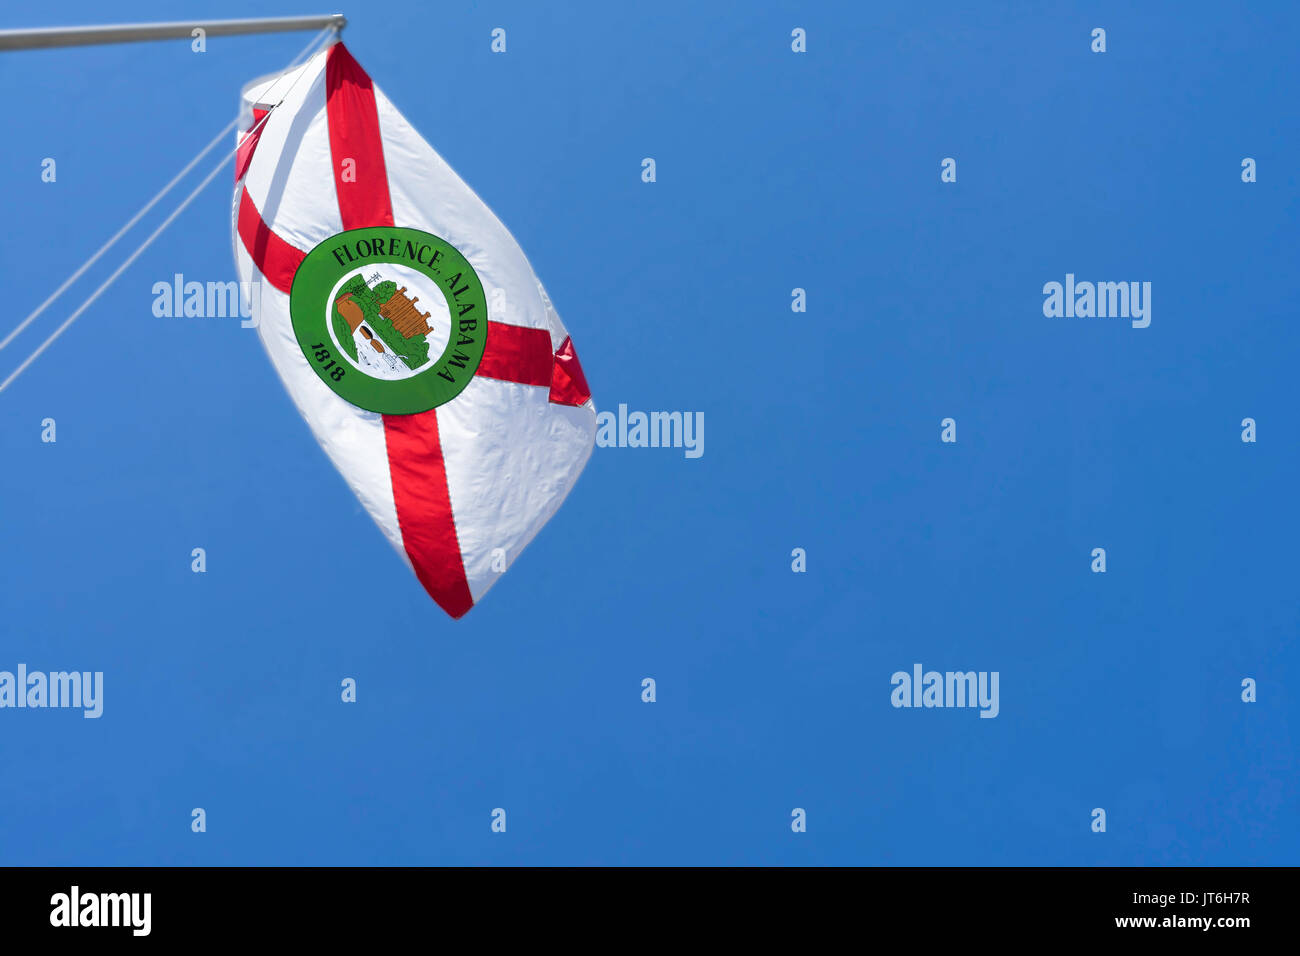 The flag of Florence, Alabama flutters in the breeze above the Tennessee River. Stock Photo